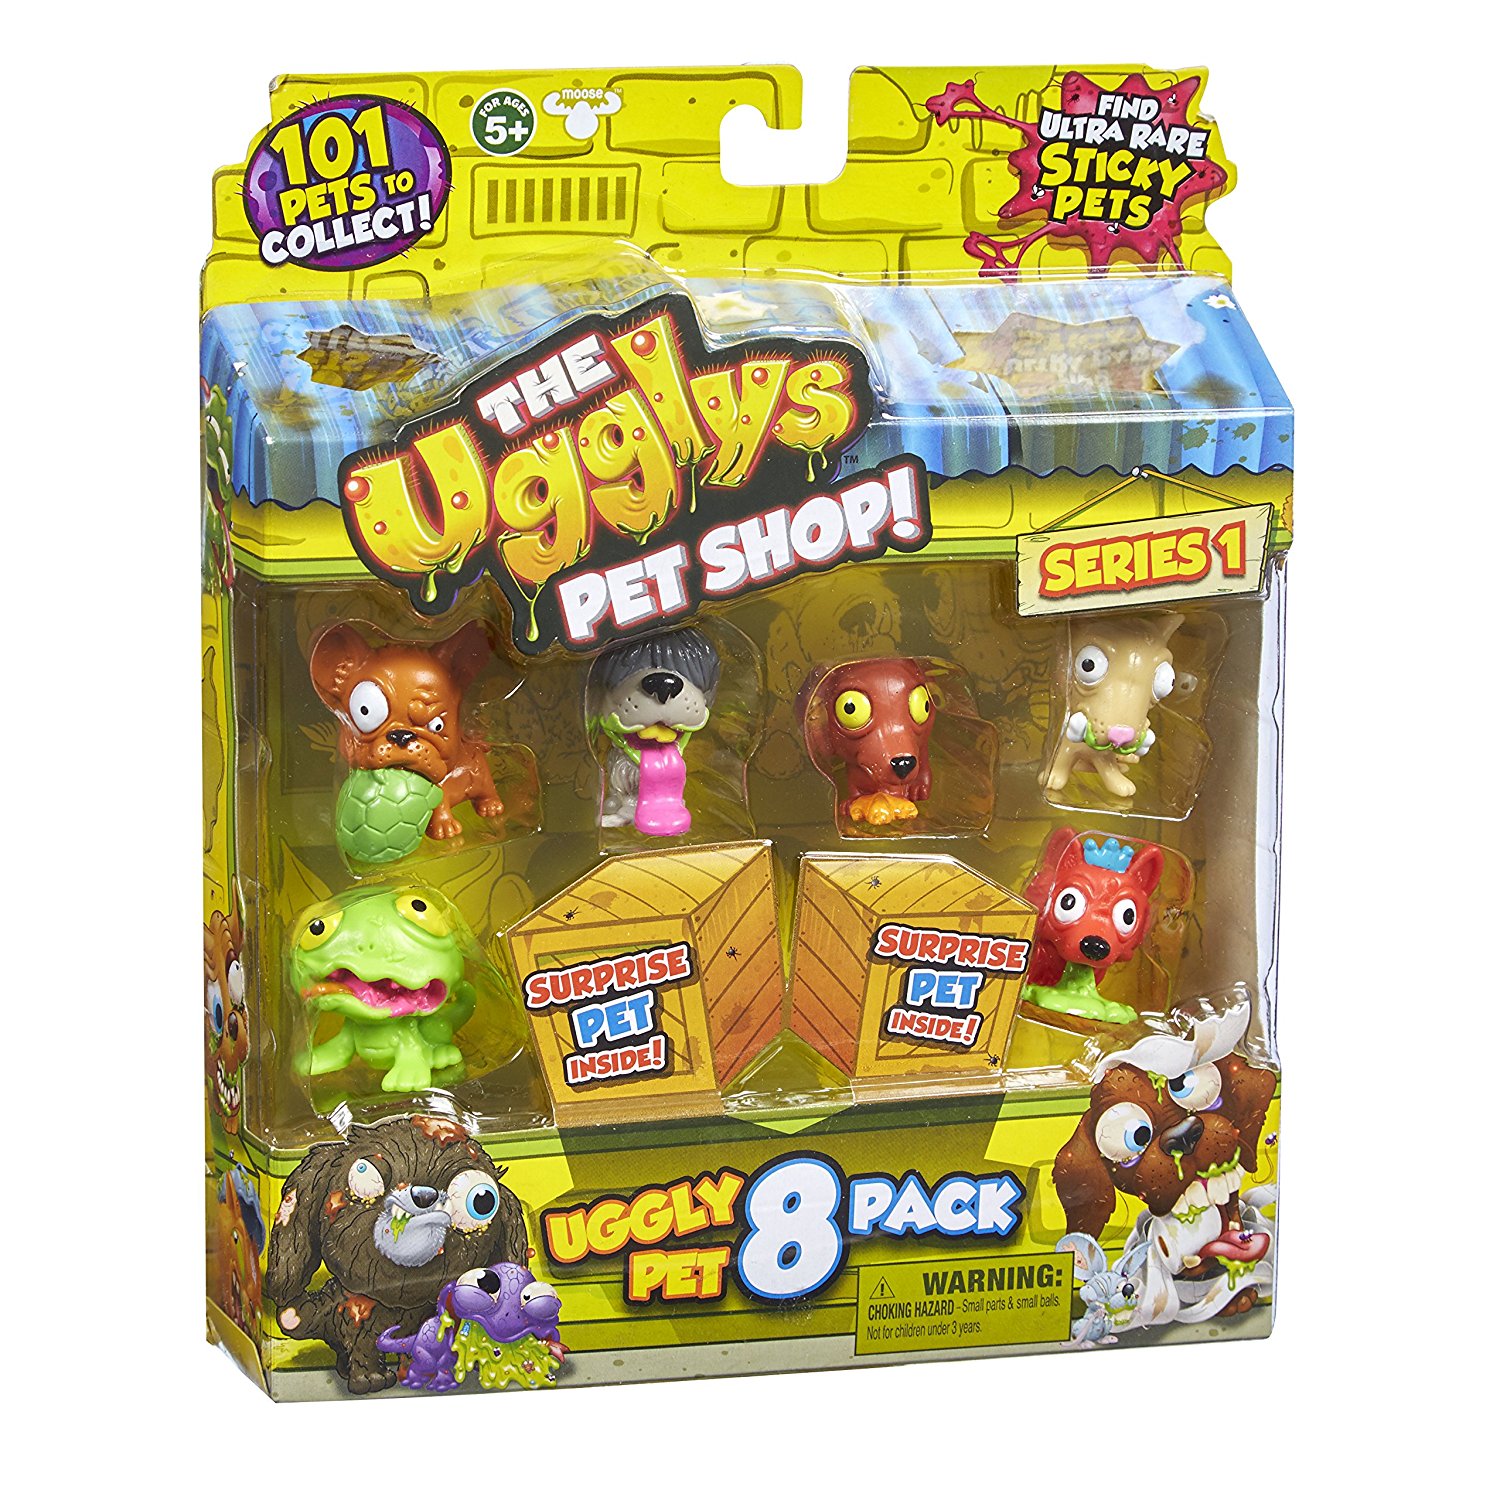 The Ugglys Pet Shop Toy Figure 8-Pack – Just $4.95!